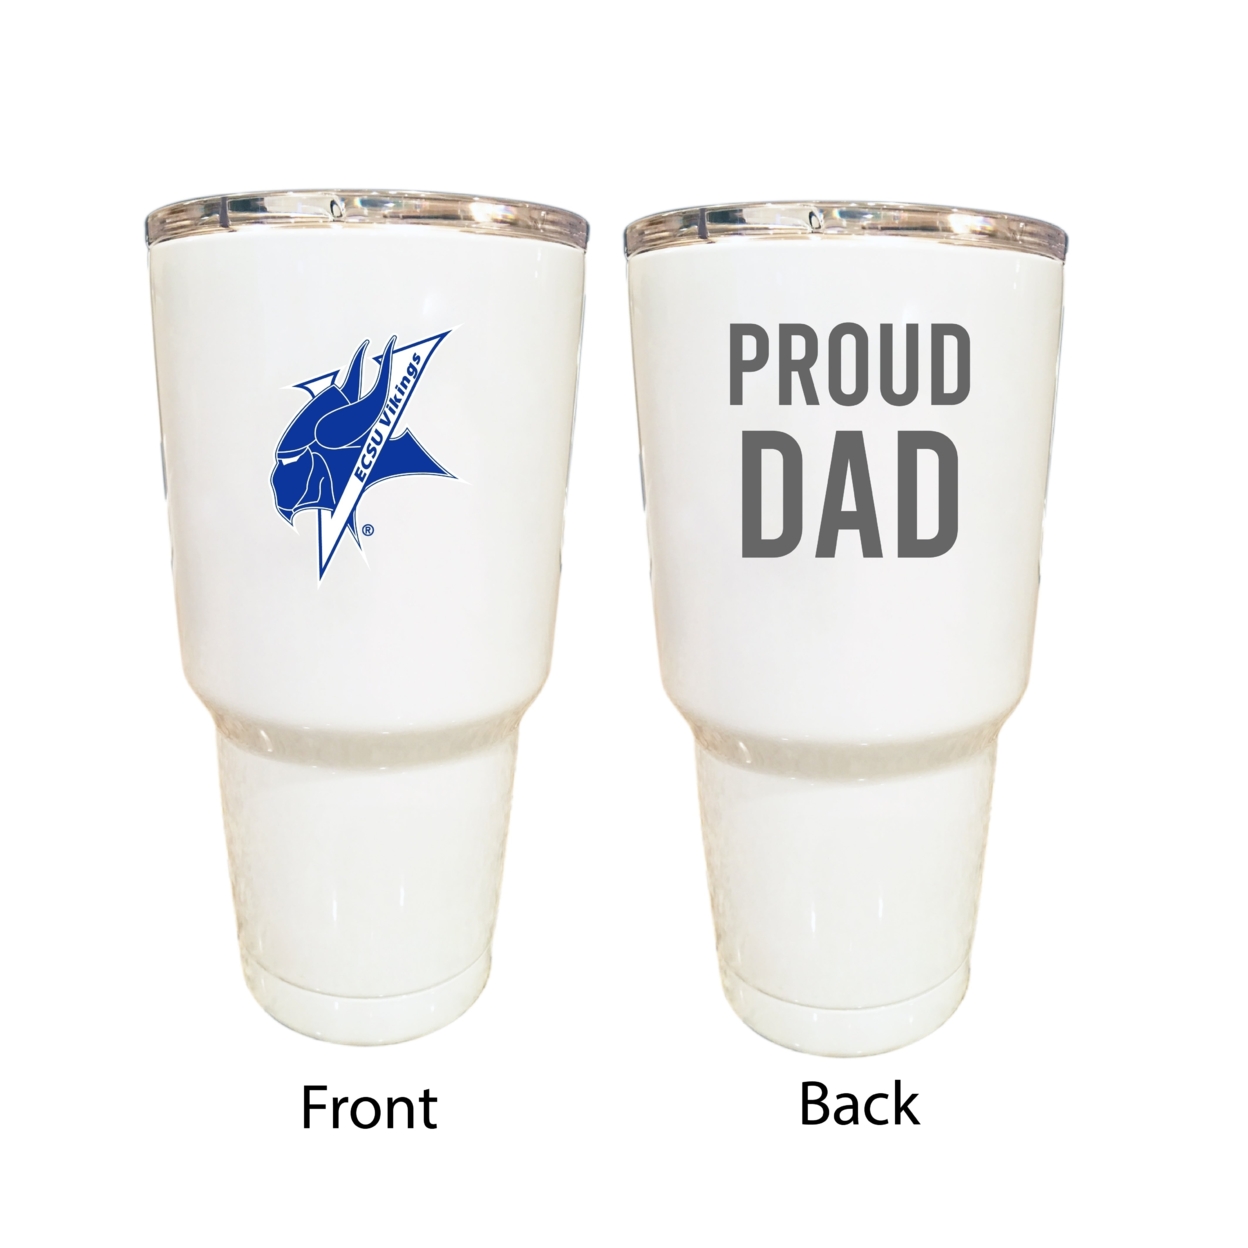 Elizabeth City State University Proud Dad 24 Oz Insulated Stainless Steel Tumblers Choose Your Color.